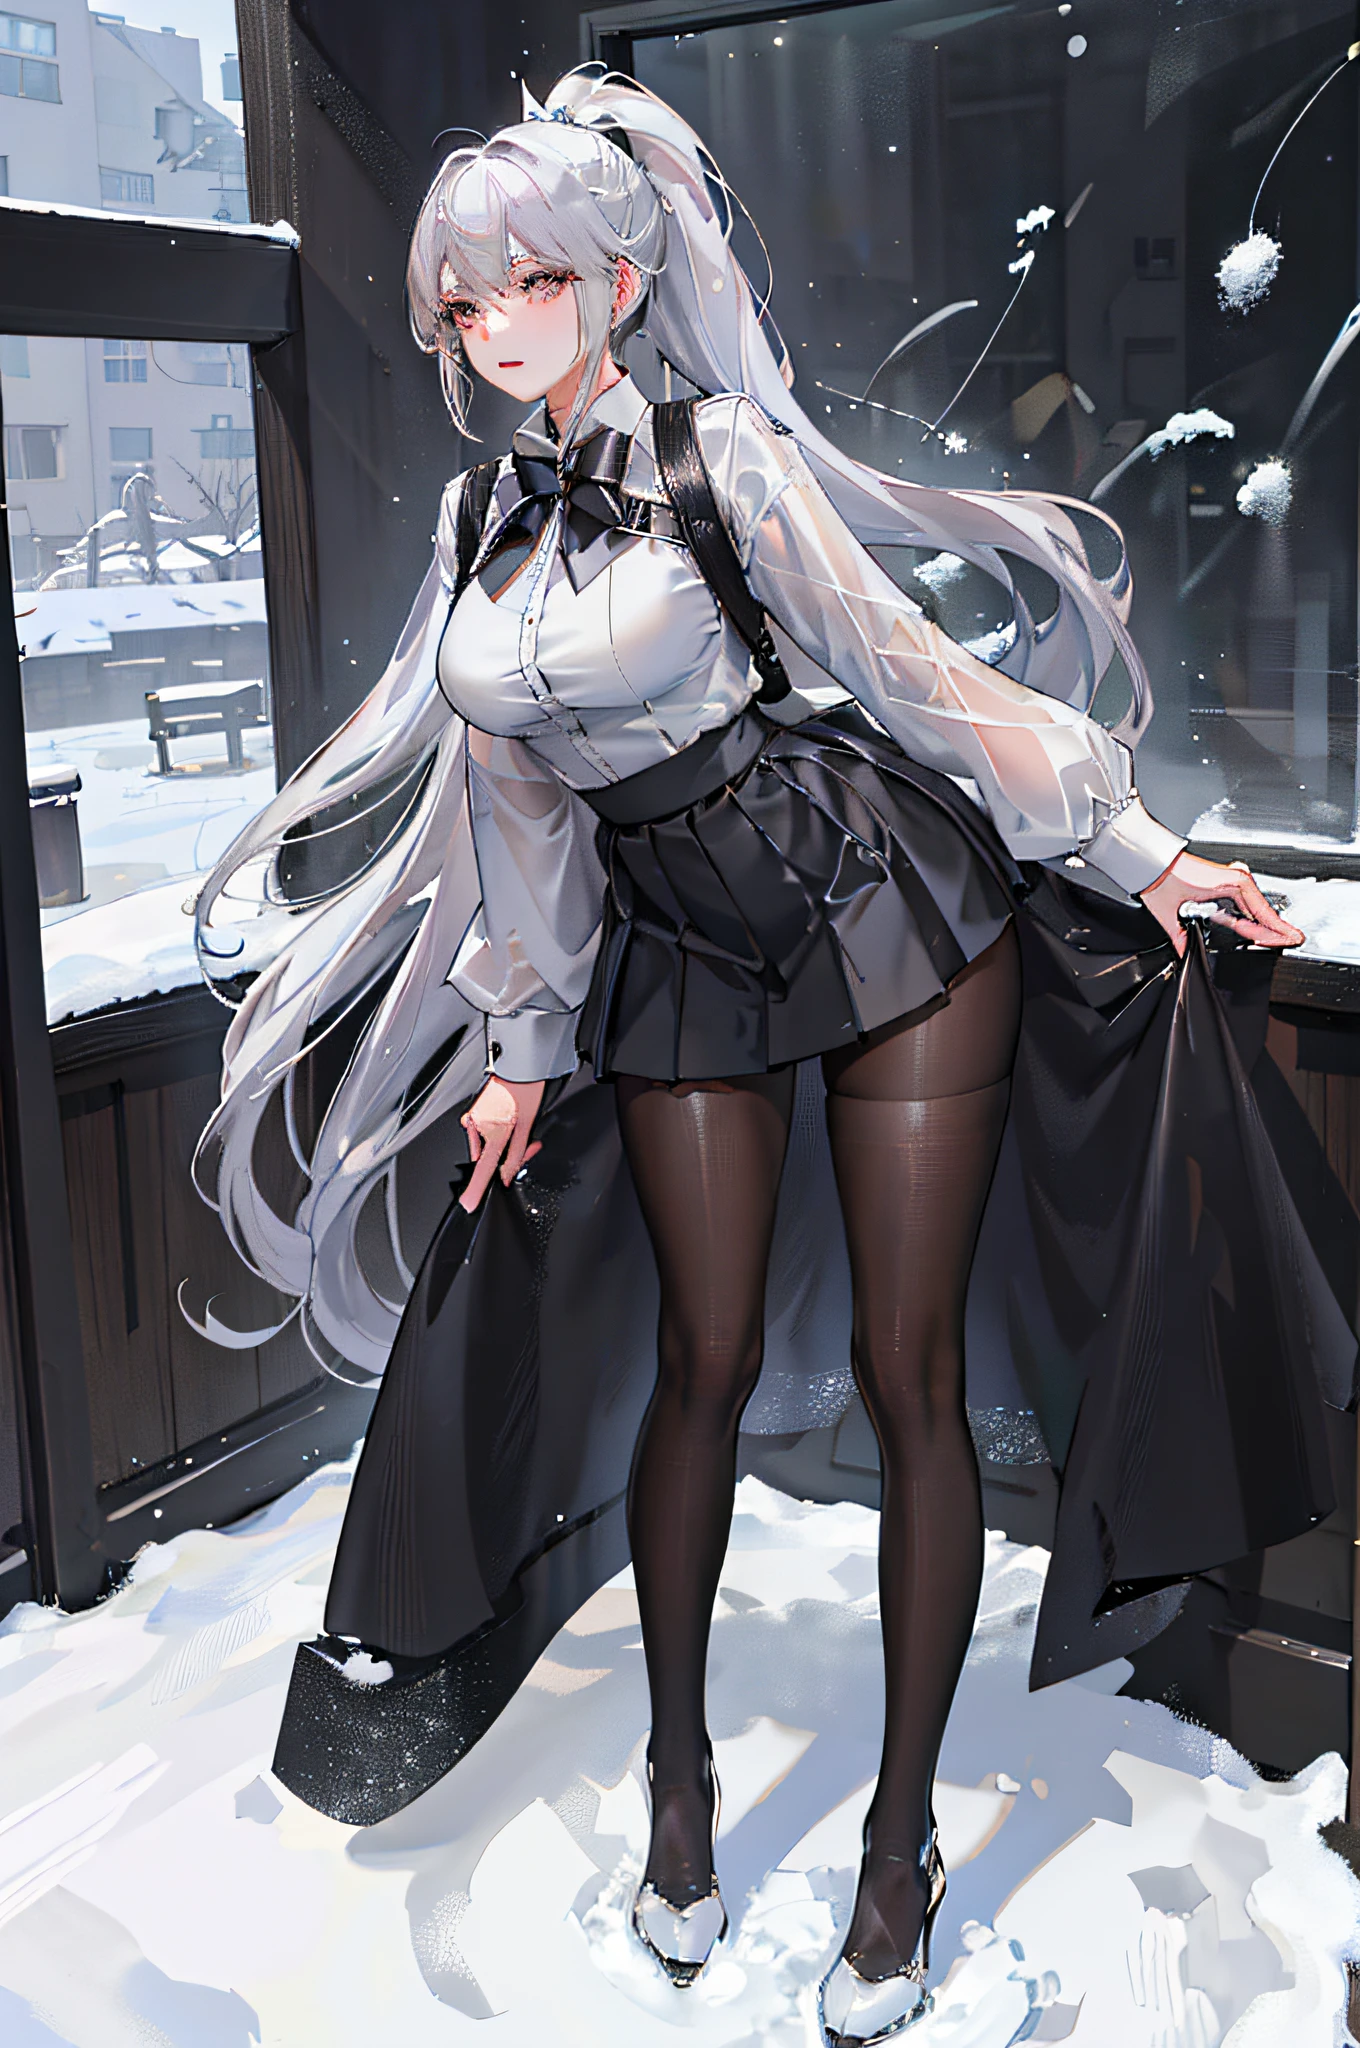 (Silver-haired girl with beautiful figure: 1.3), (Girl with high ponytail: 1.2), (curvy girl wearing white shirt + black pleated skirt + black transparent pantyhose), ray tracing, emphasizing snow-white skin and slender legs, full of temperament.